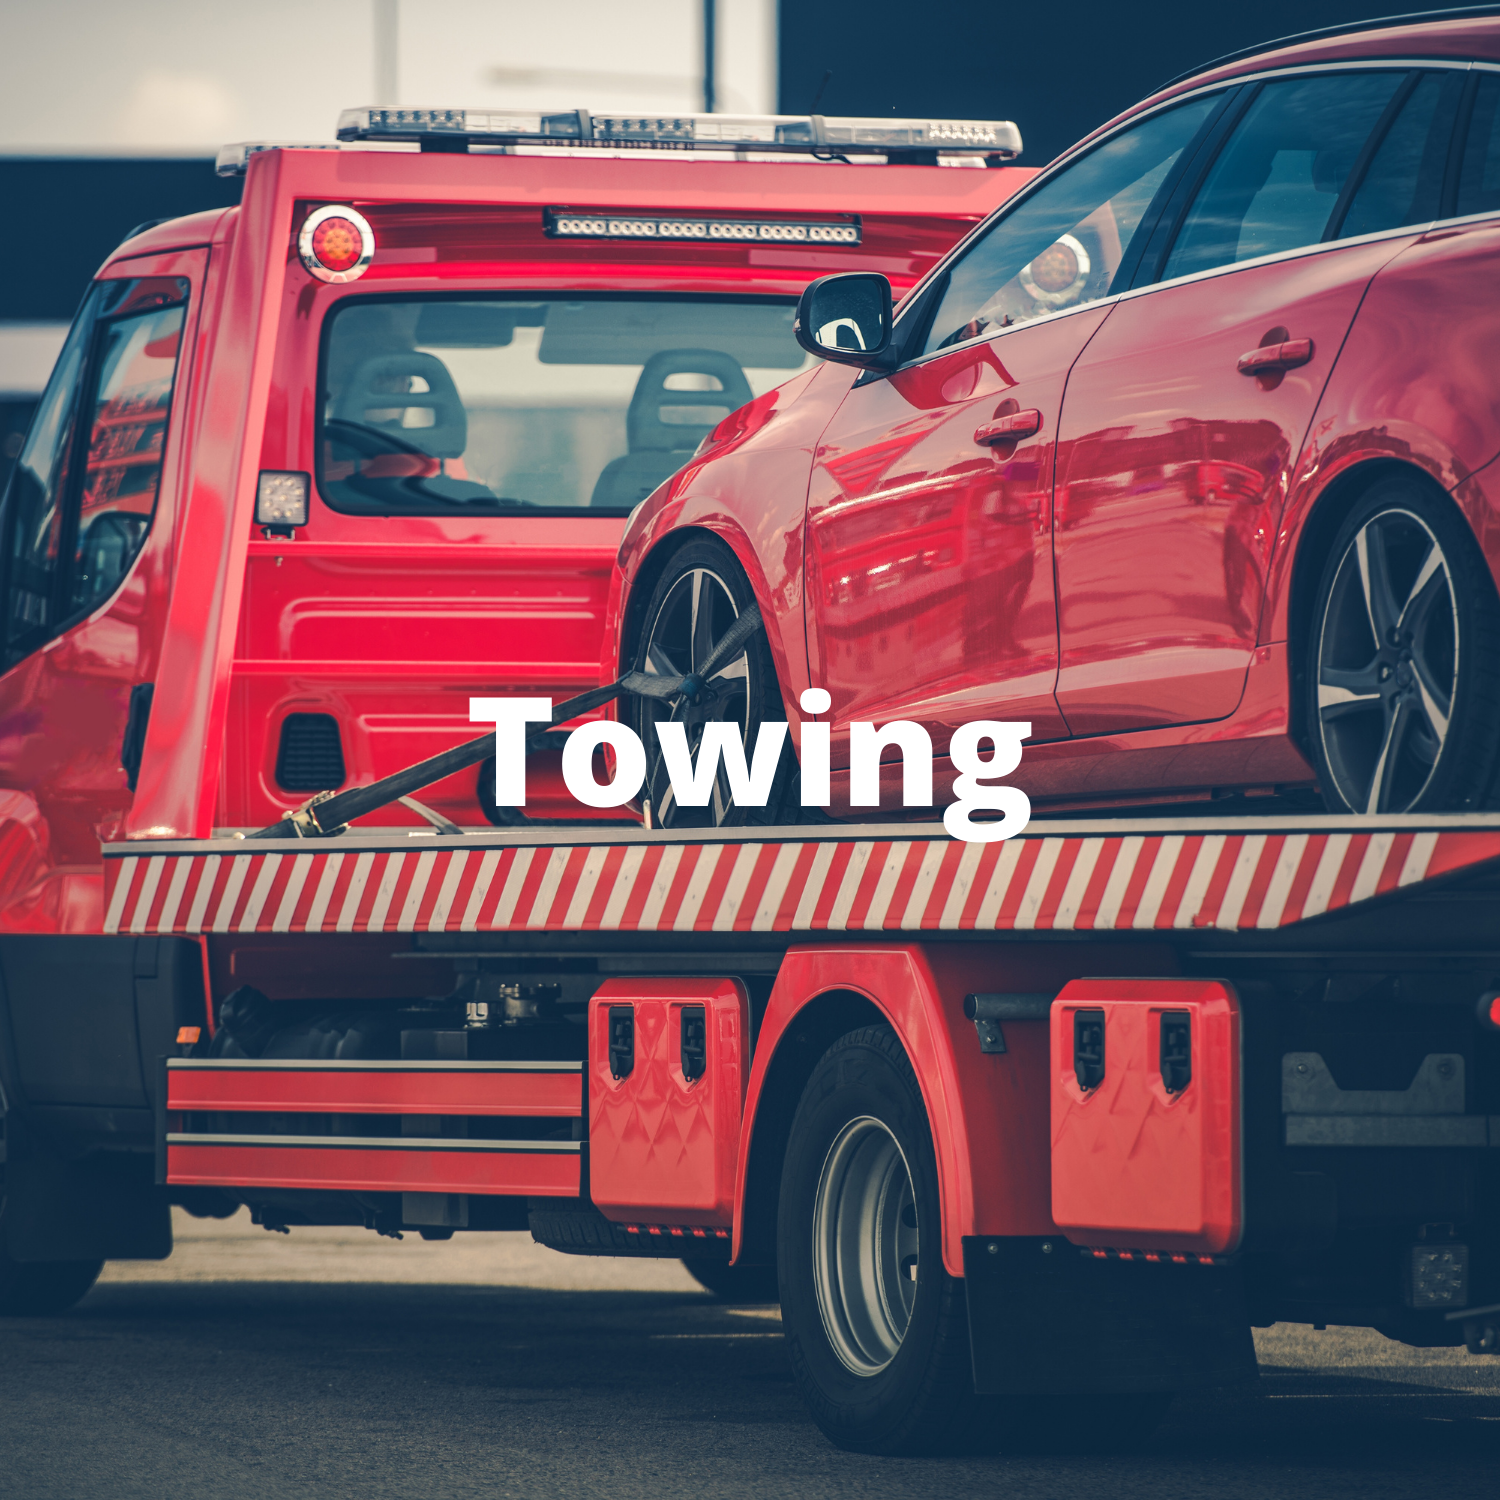 Red car being towed by a red tow truck